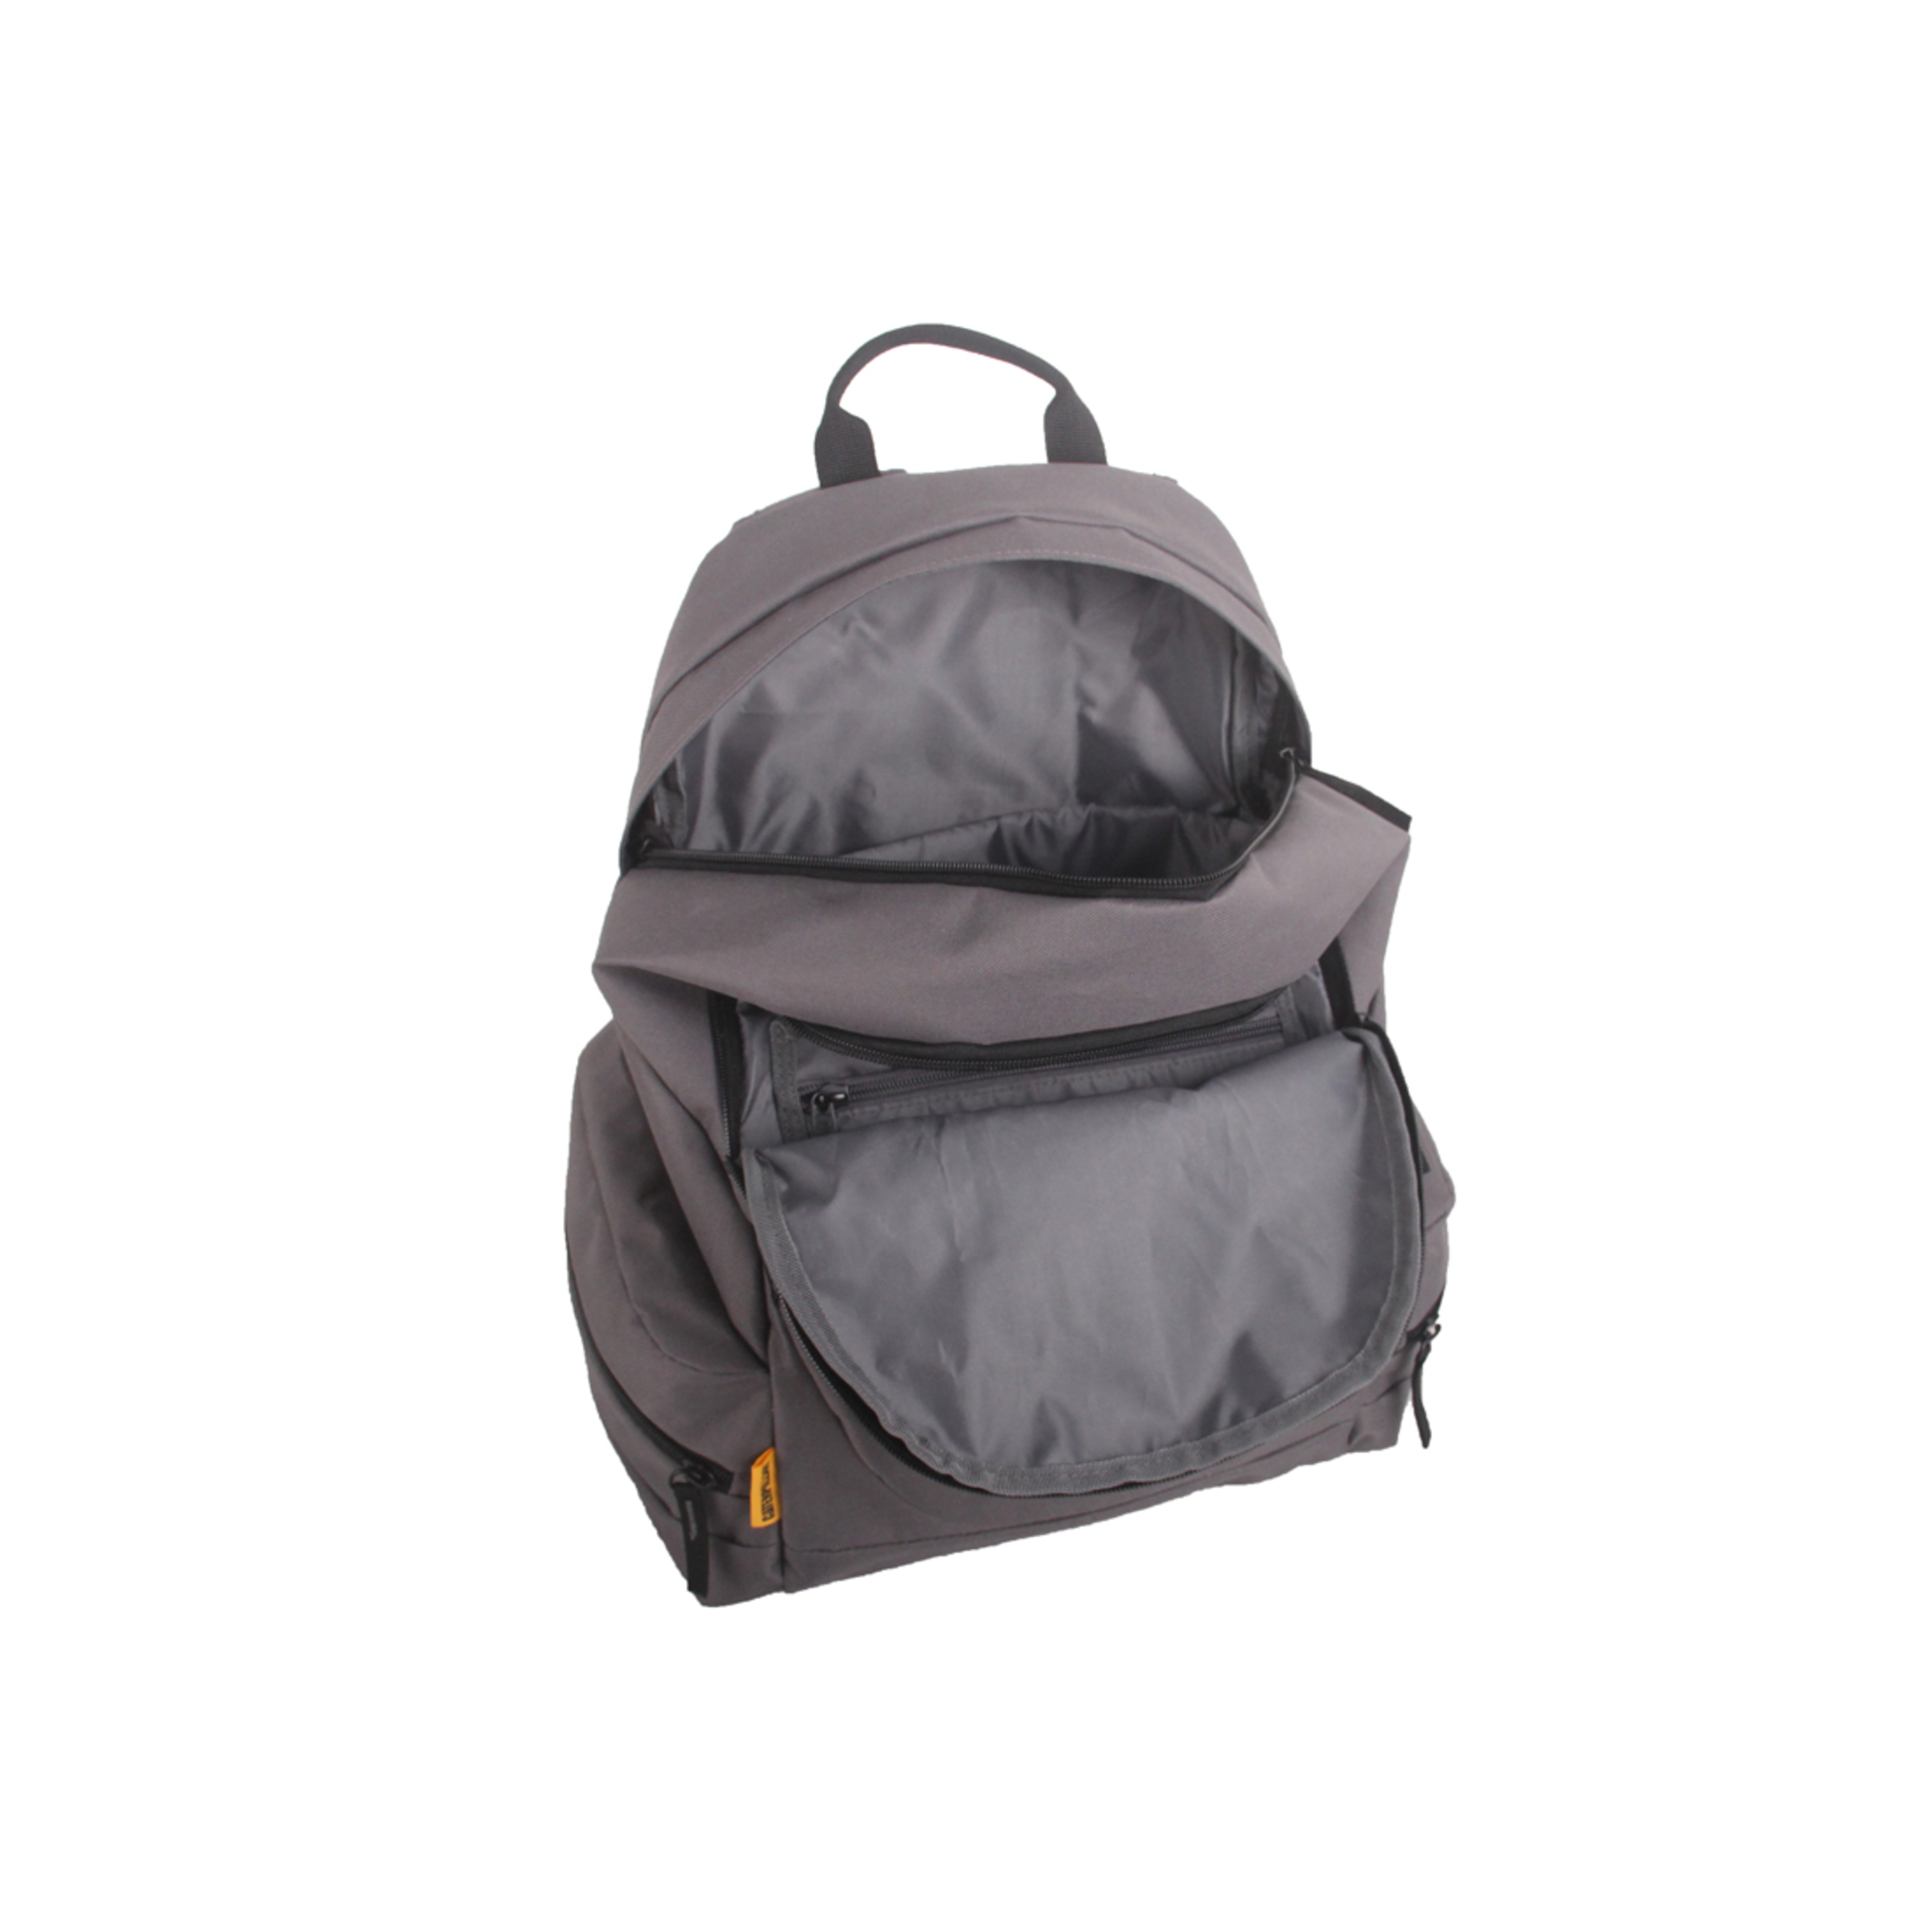 Caterpillar The Project Backpack 83541-06